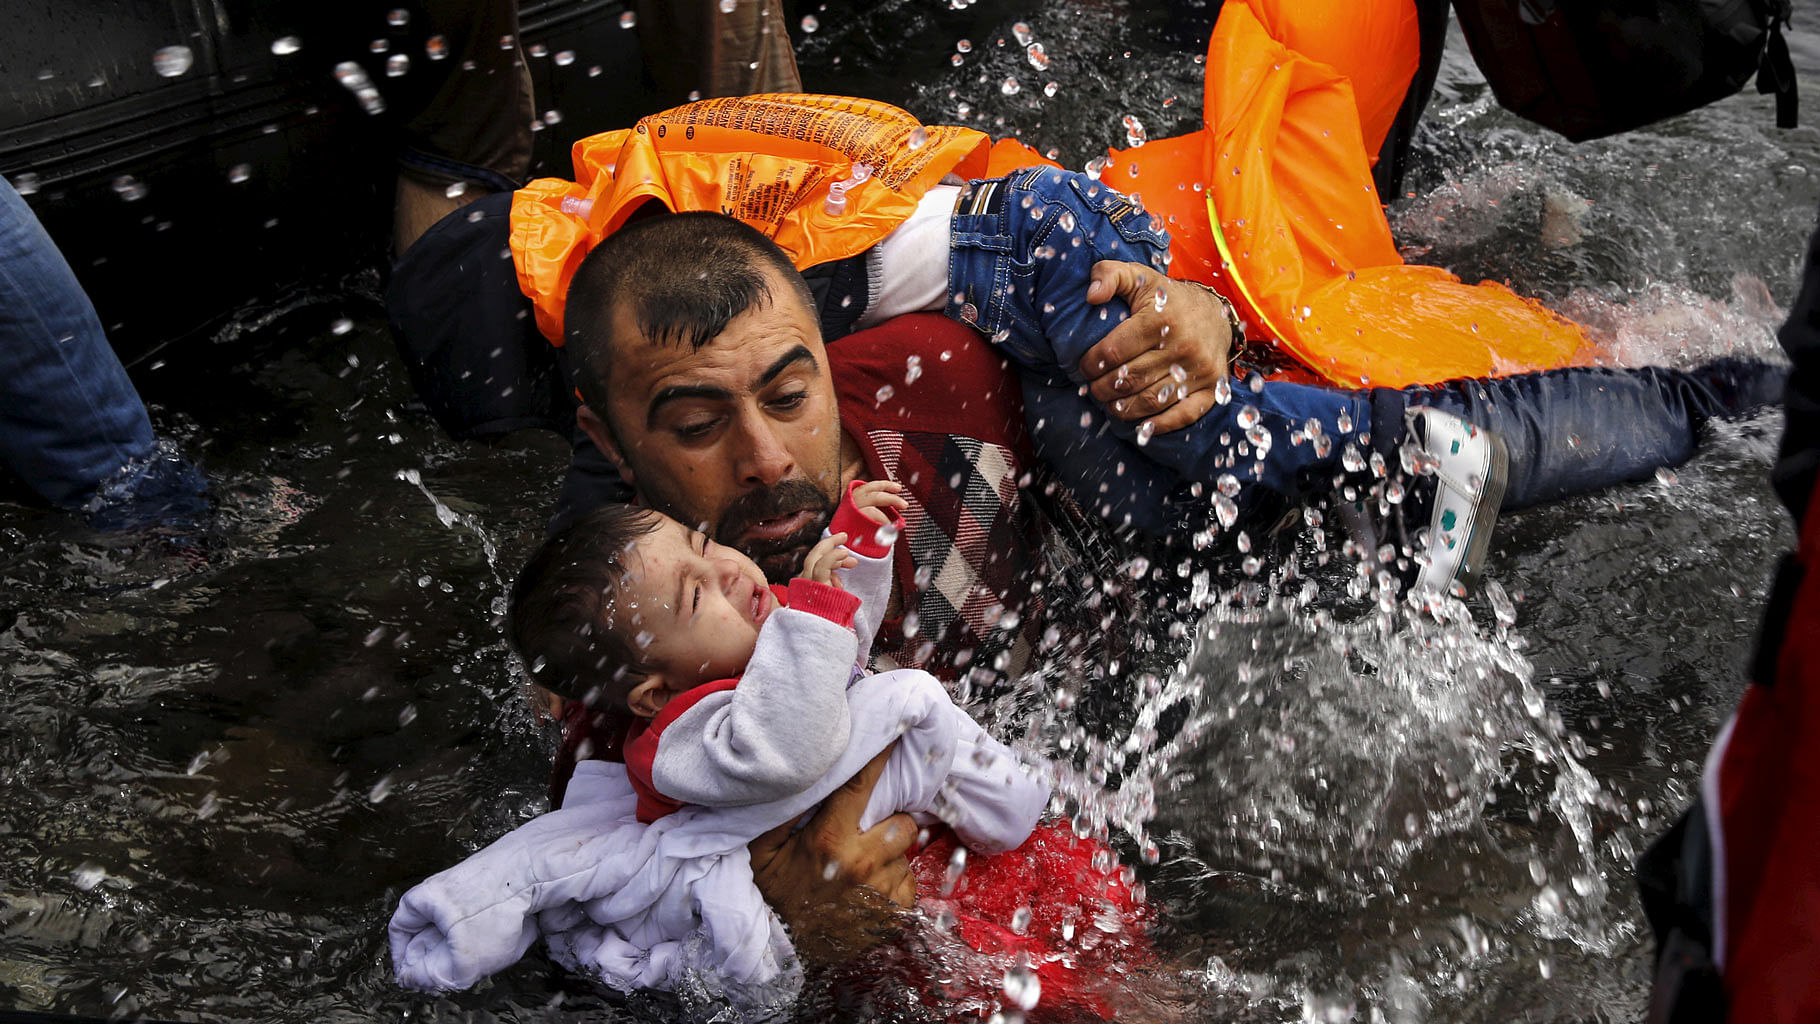 A Syrian refugee holds onto his children as he struggles to walk off a dinghy on the Greek island of Lesbos, after crossing a part of the Aegean Sea from Turkey to Lesbos 24 September  2015. (Photo: Reuters/Yannis Behrakis)